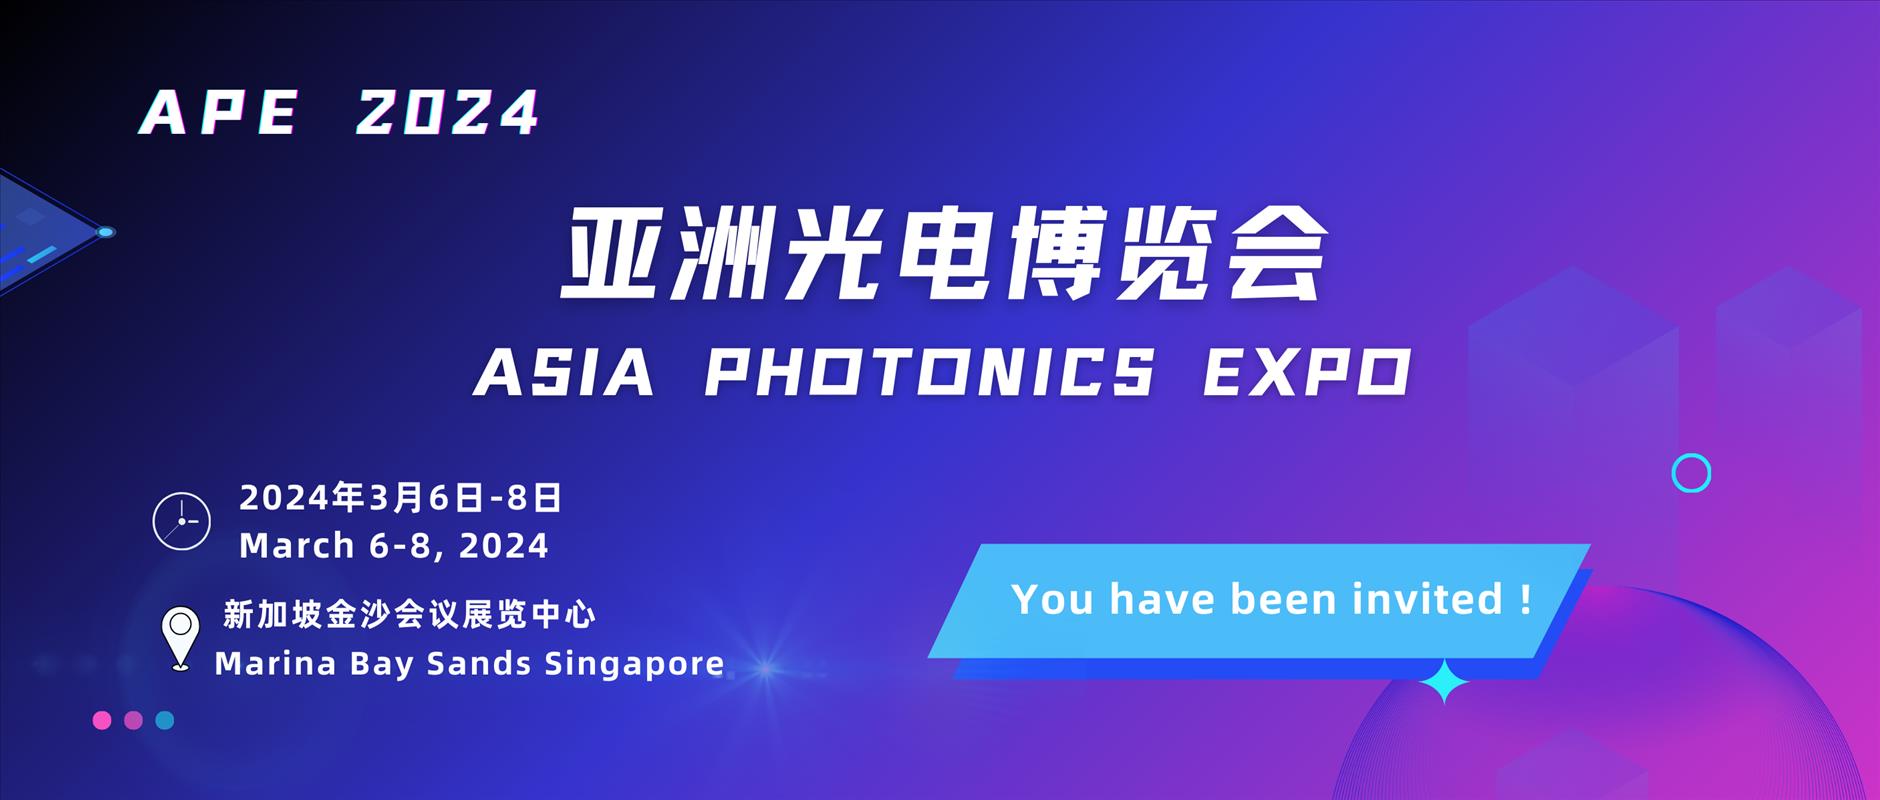 Invitation | Welcome to visit Photonx at 2024 APE Exhibition at Singapore